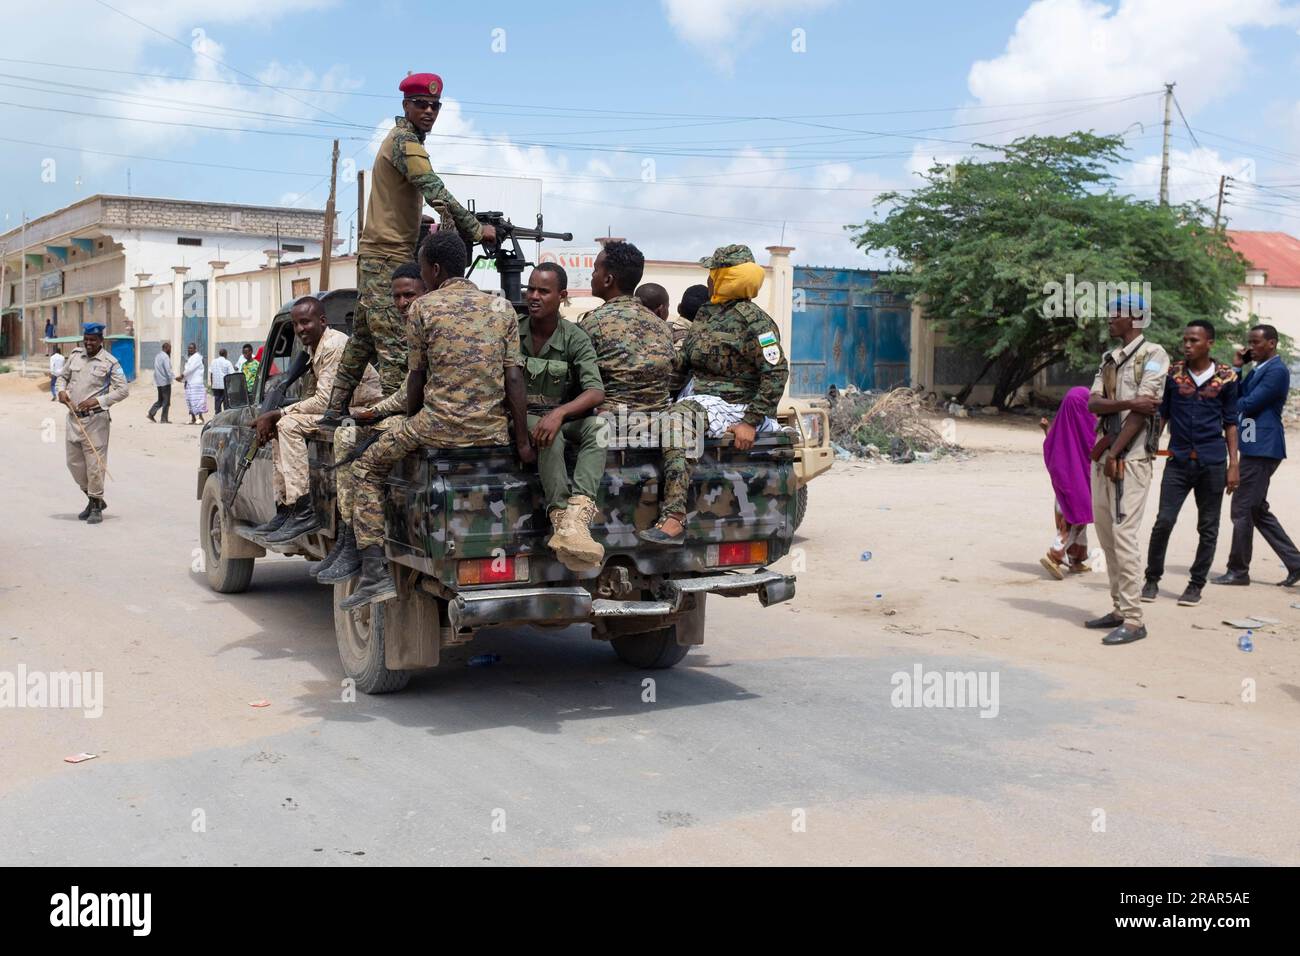 Soldiers ride on a 'technical' pick-up truck in Kismayo, Southern Somalia Stock Photo